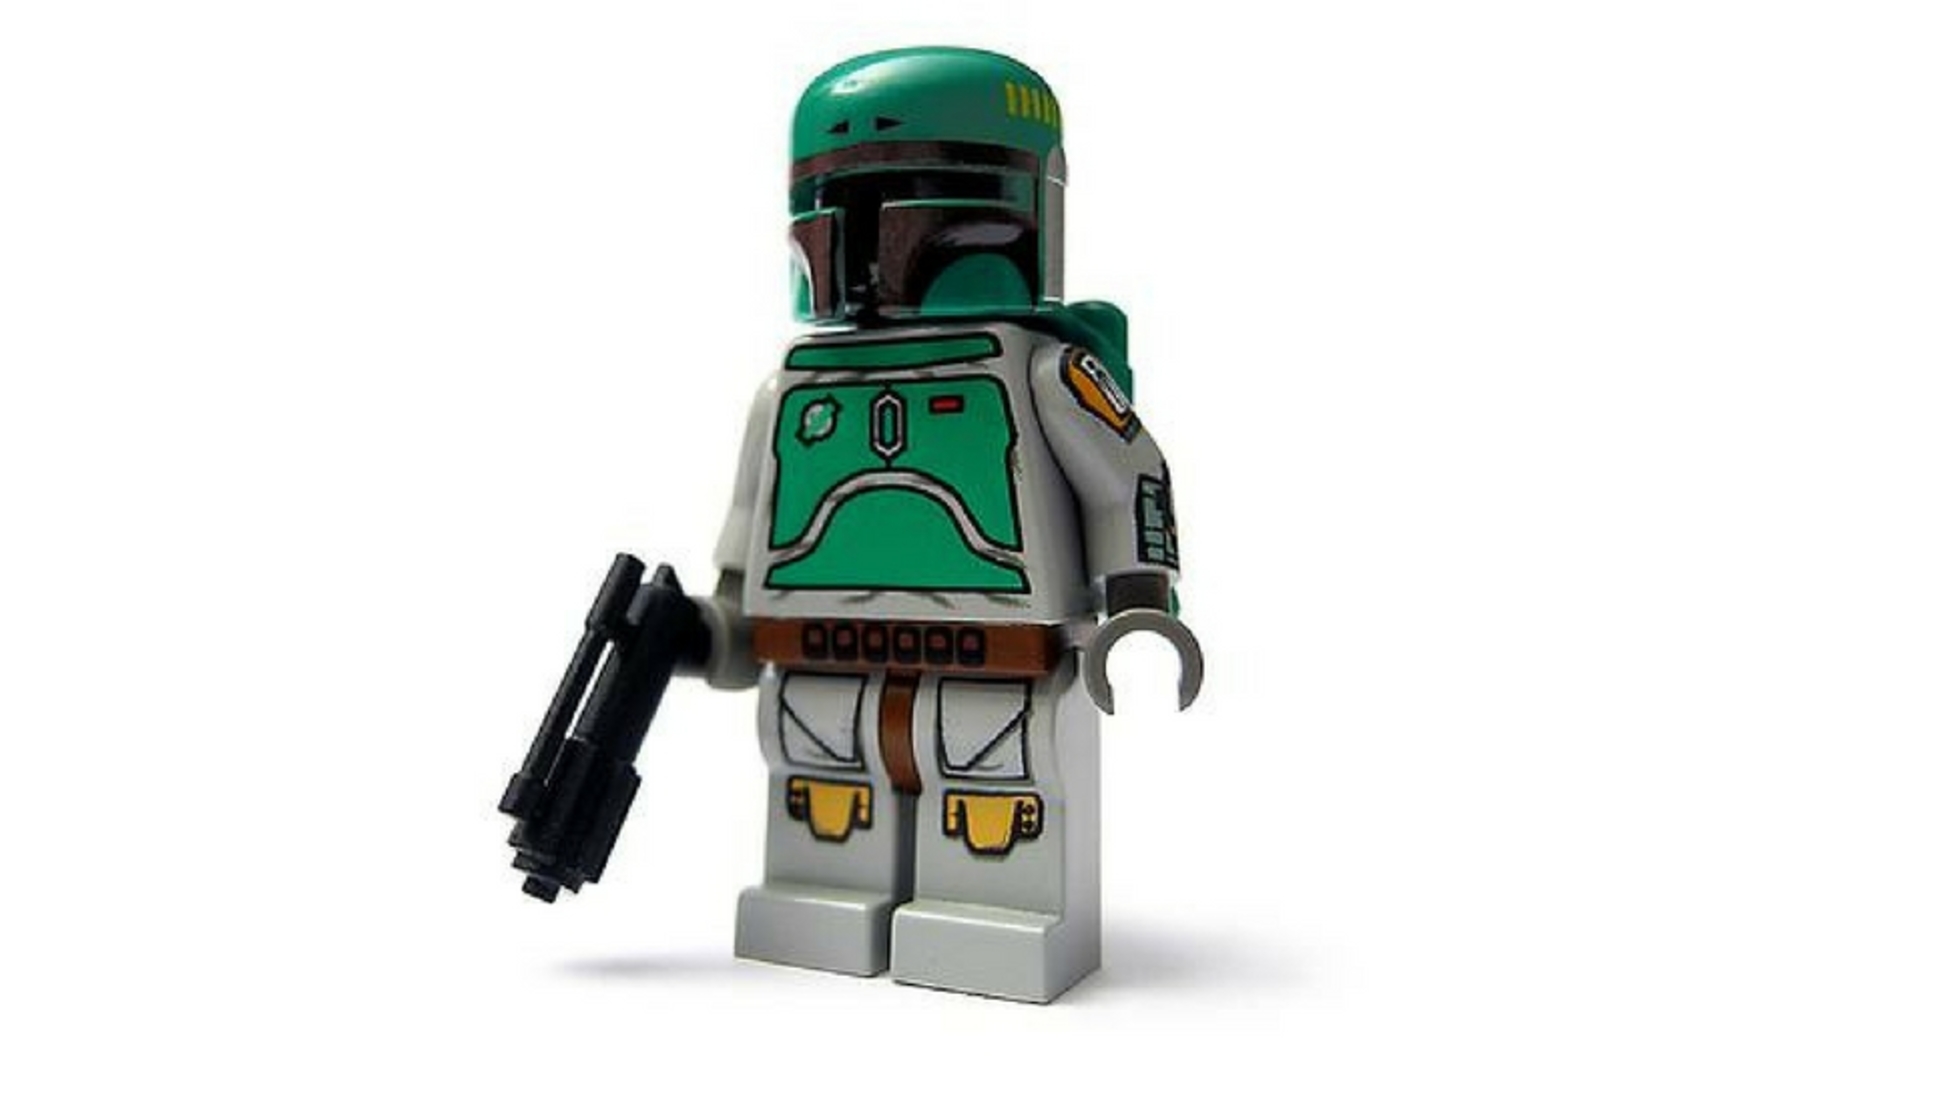 lego sets that are worth money